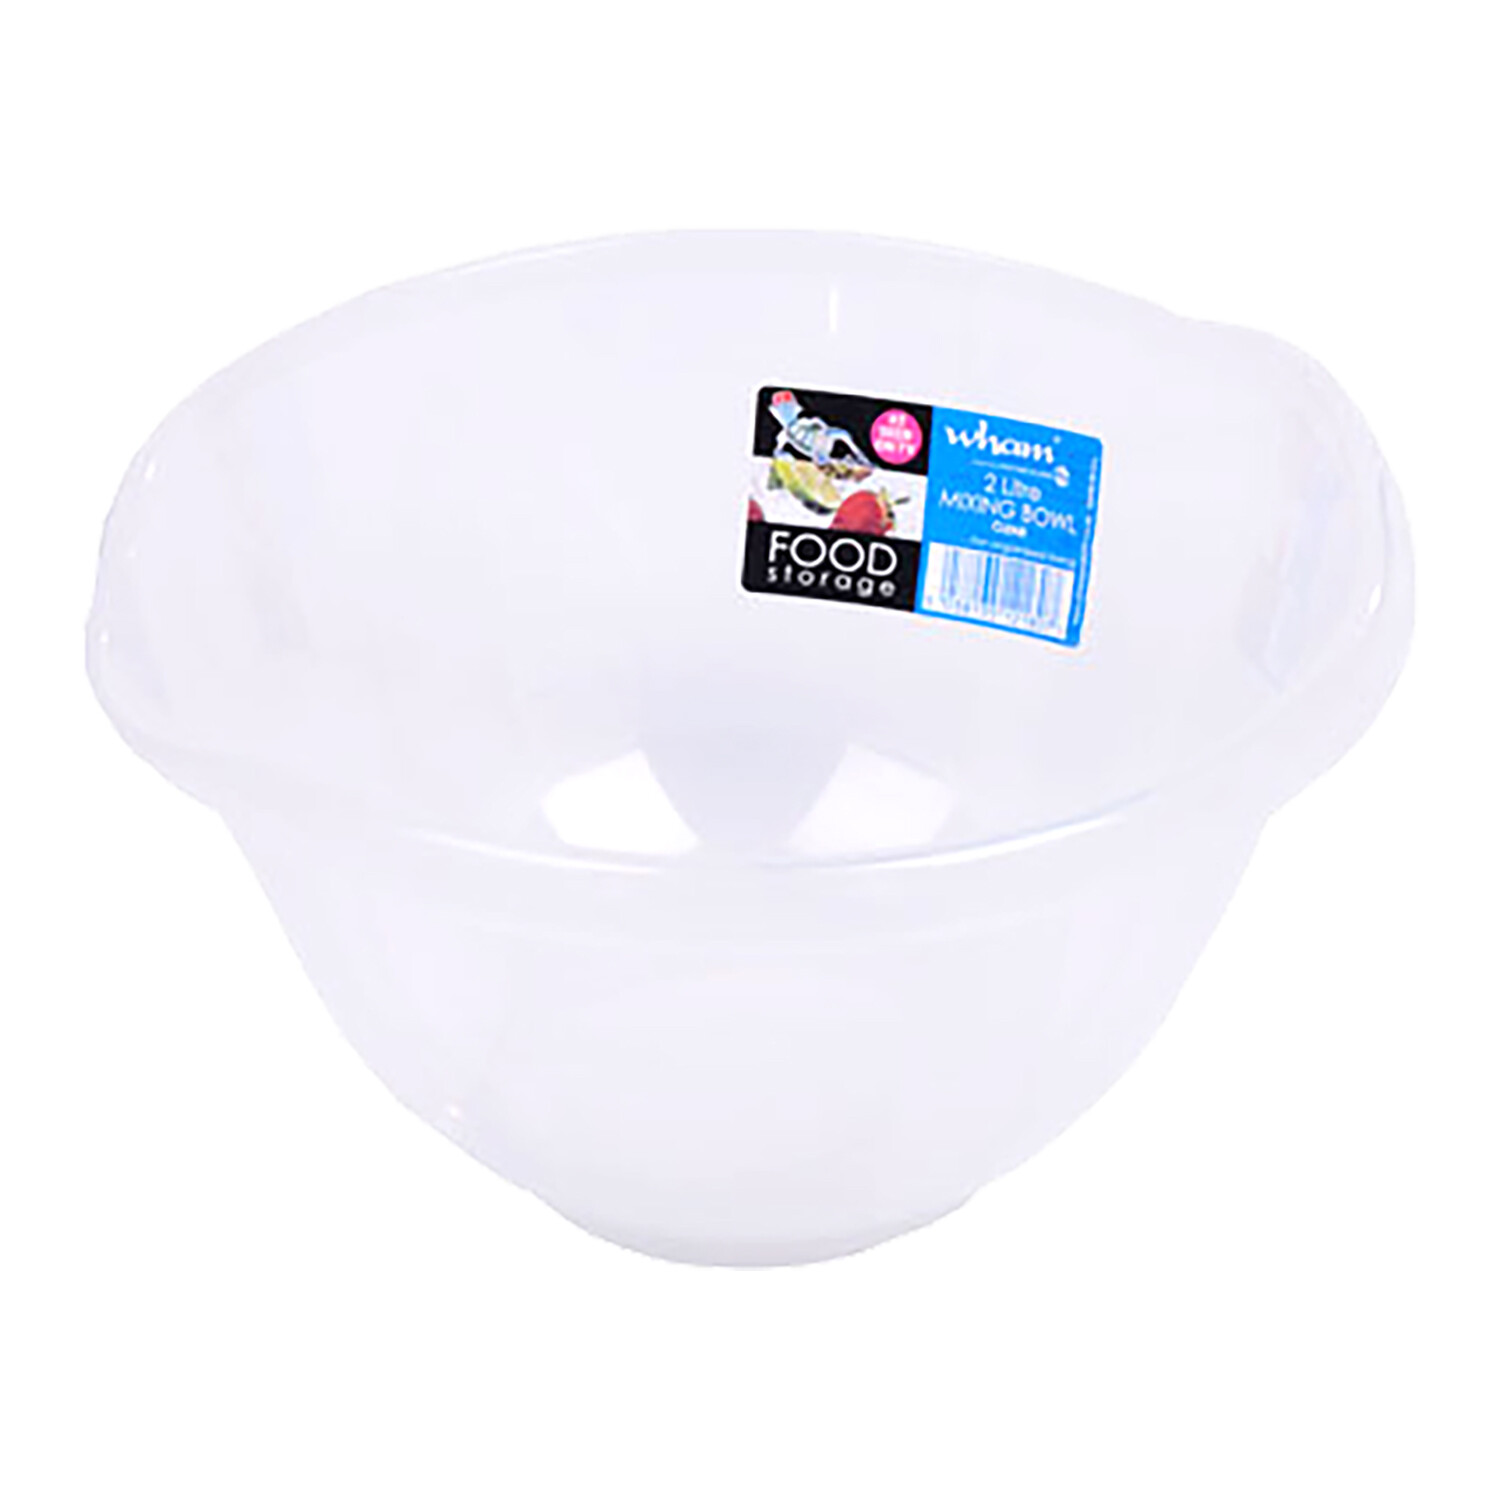 Wham 4L Clear Mixing Bowl Image